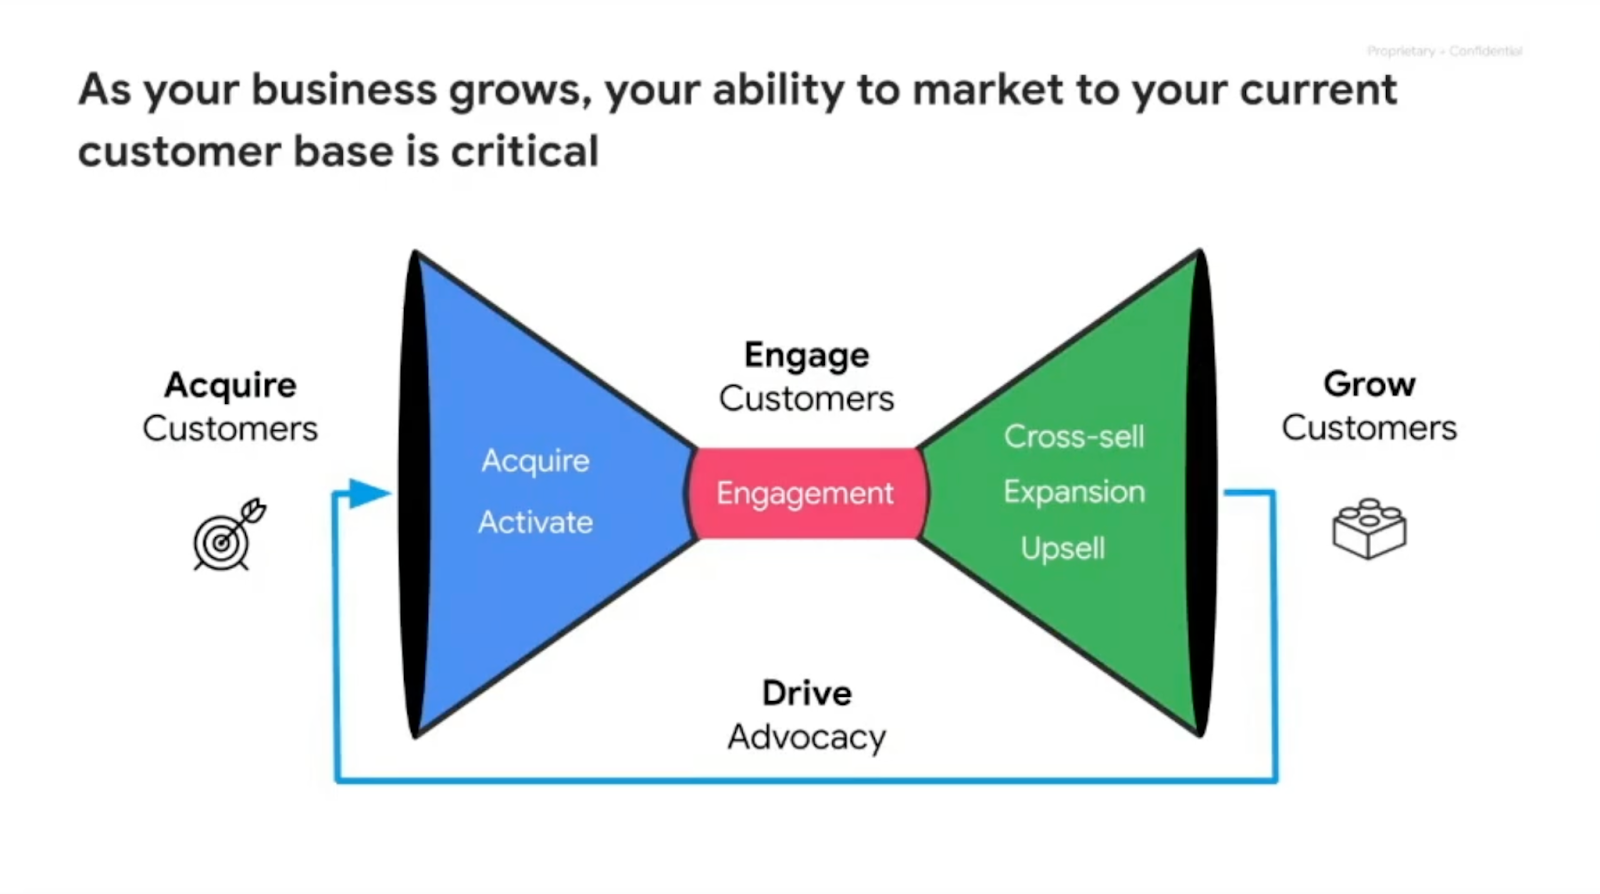 As your business grows, your ability to market to your current customer base is critical.